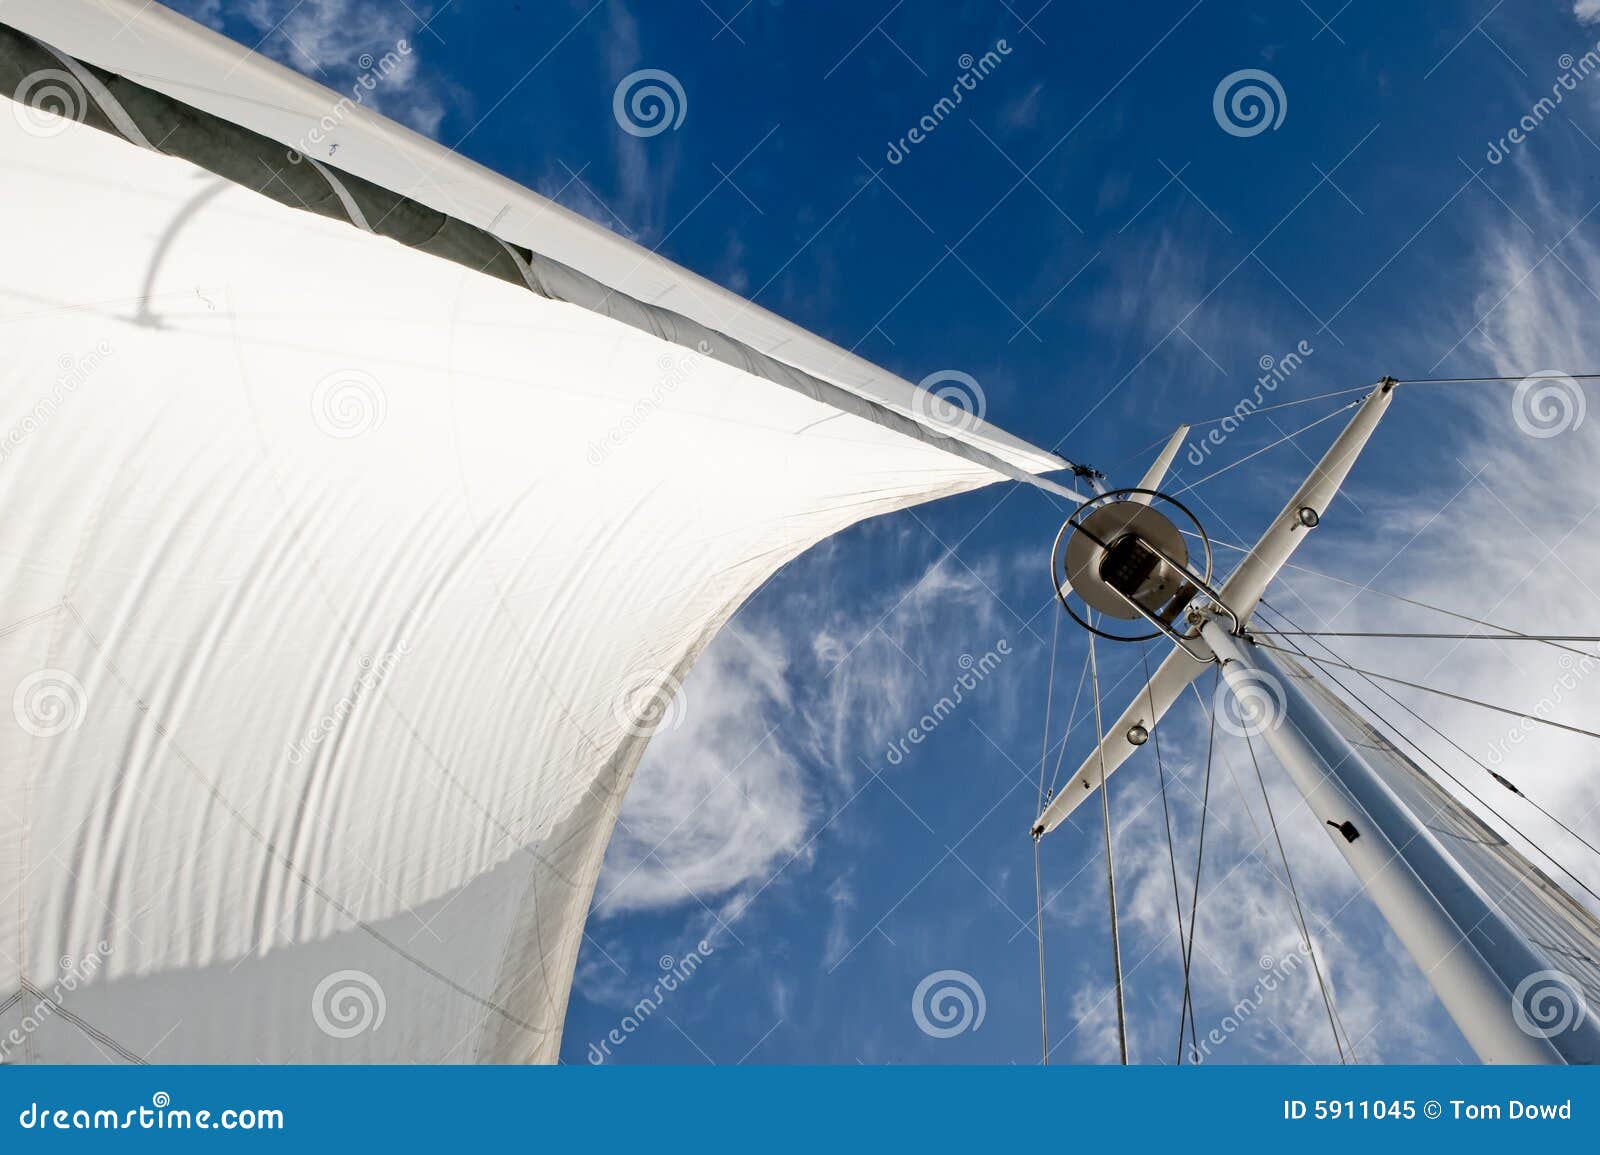 details of sail and mast